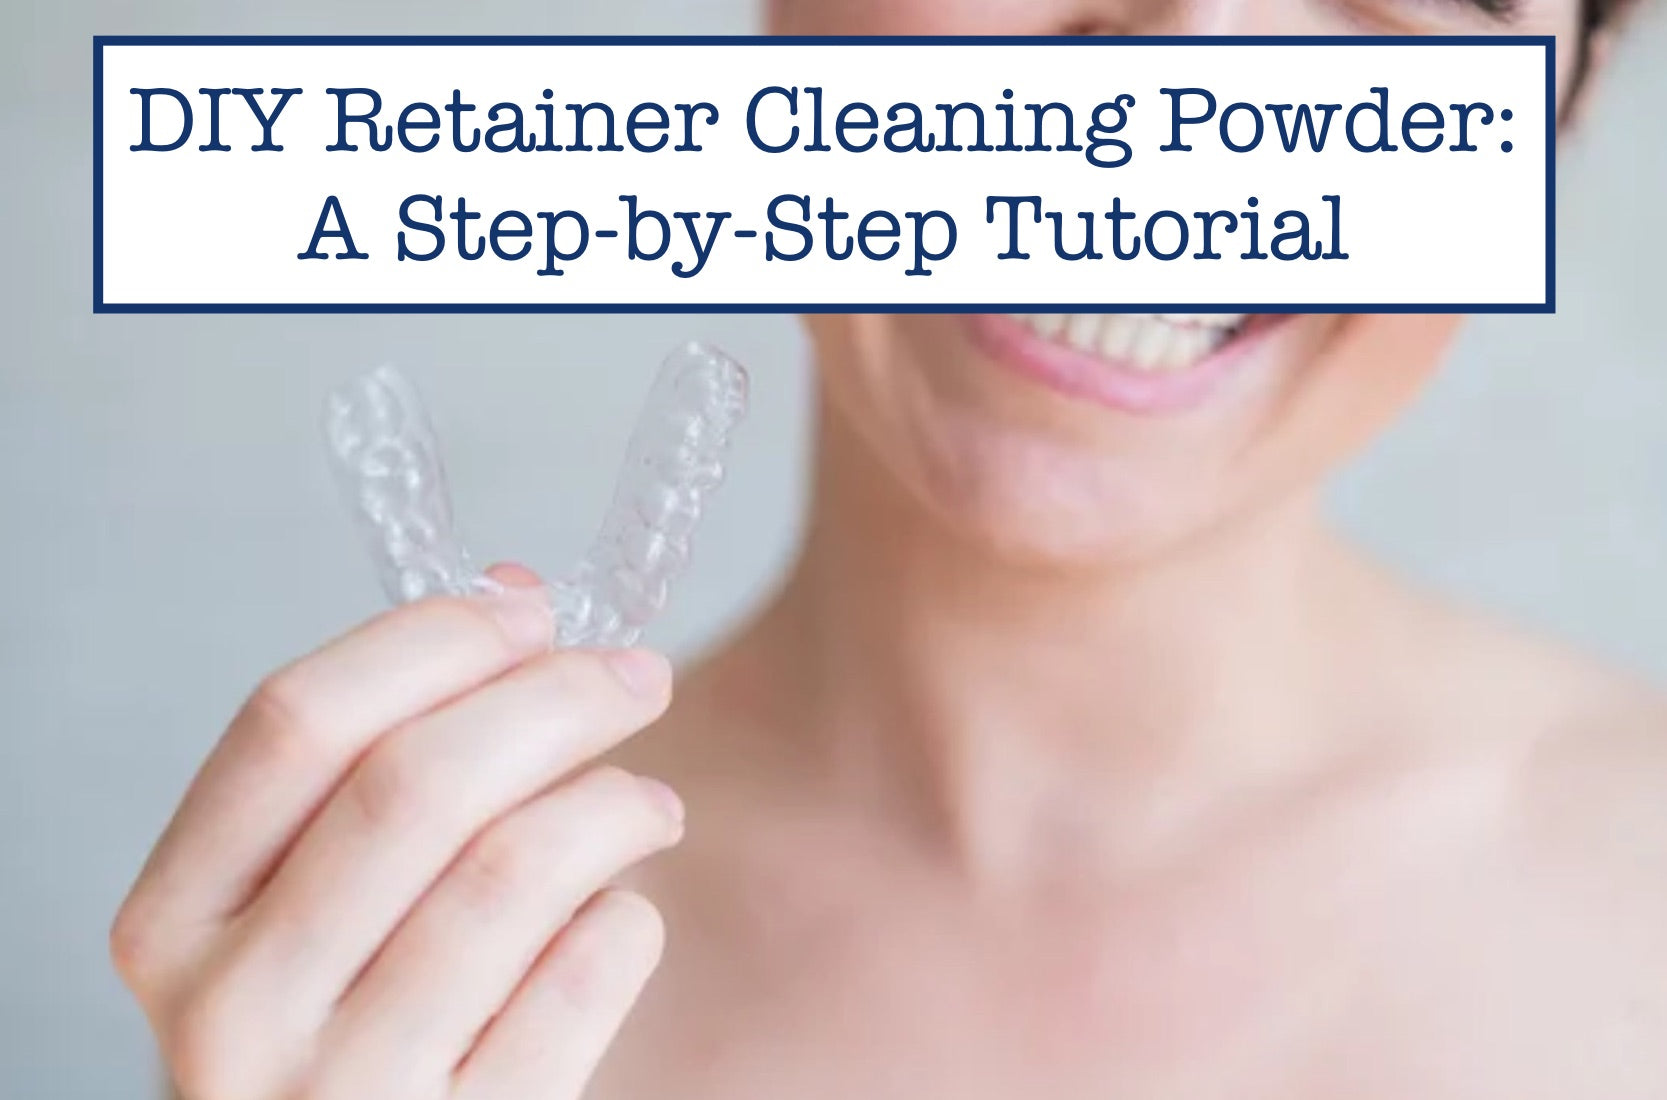 DIY Retainer Cleaning Powder: A Step-by-Step Tutorial